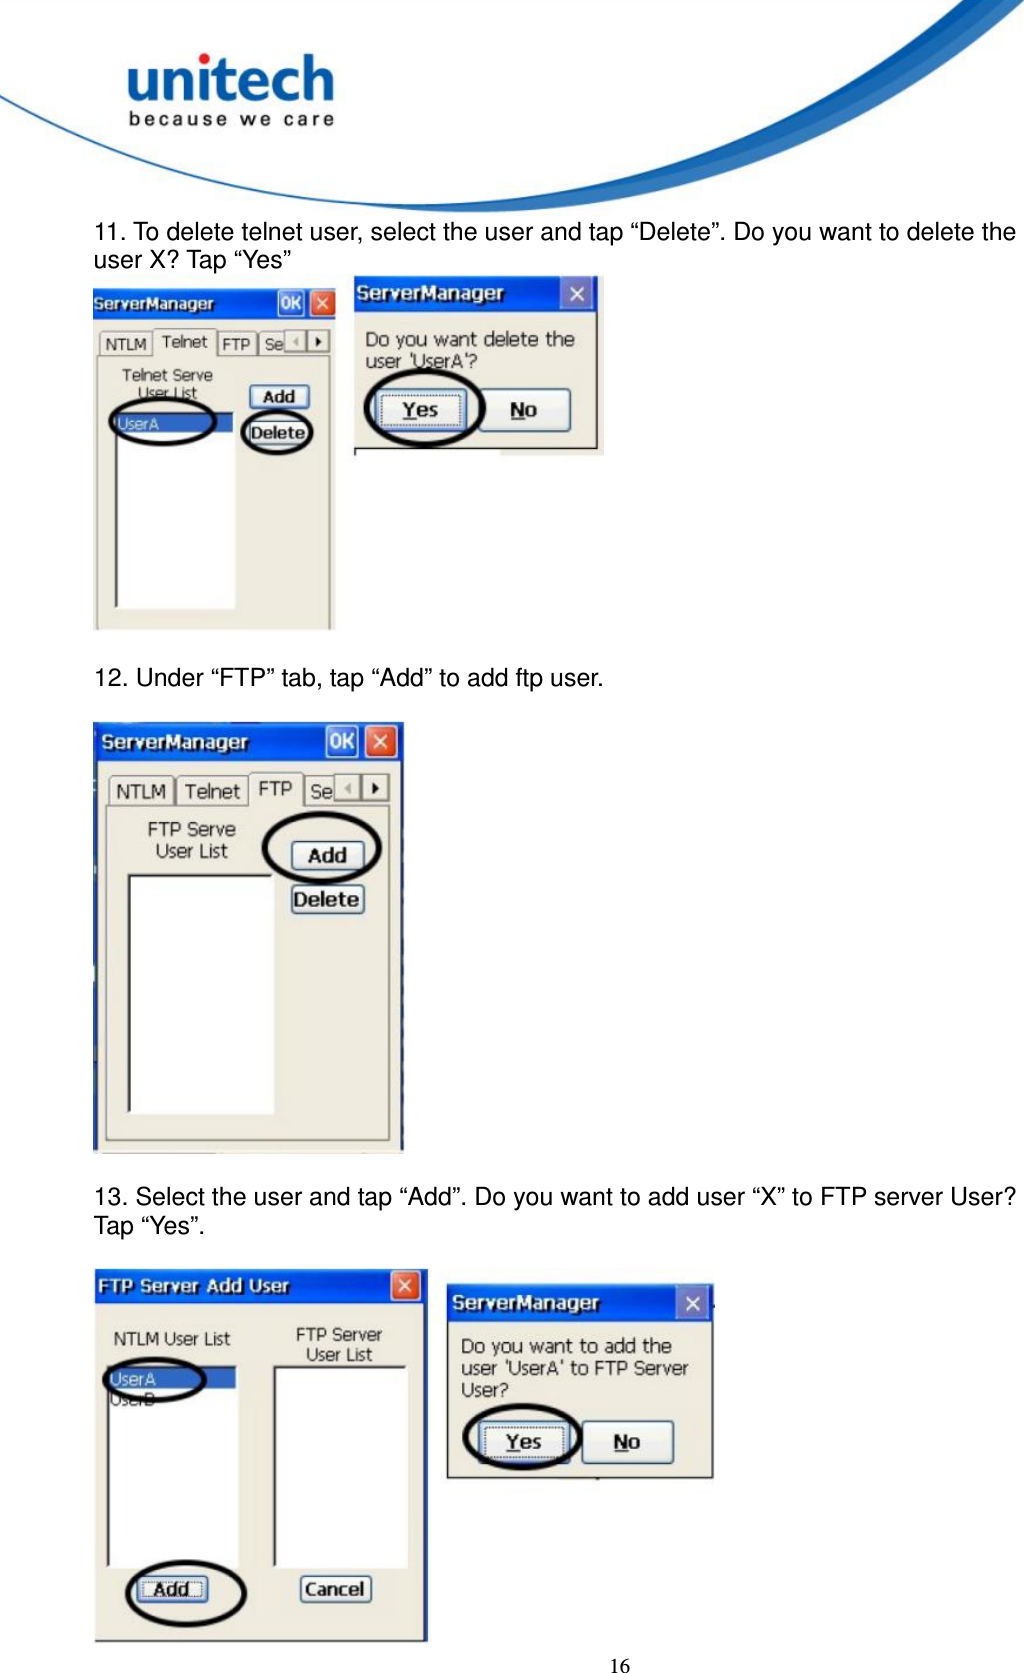  16 11. To delete telnet user, select the user and tap “Delete”. Do you want to delete the   user X? Tap “Yes”   12. Under “FTP” tab, tap “Add” to add ftp user.        13. Select the user and tap “Add”. Do you want to add user “X” to FTP server User?   Tap “Yes”.   